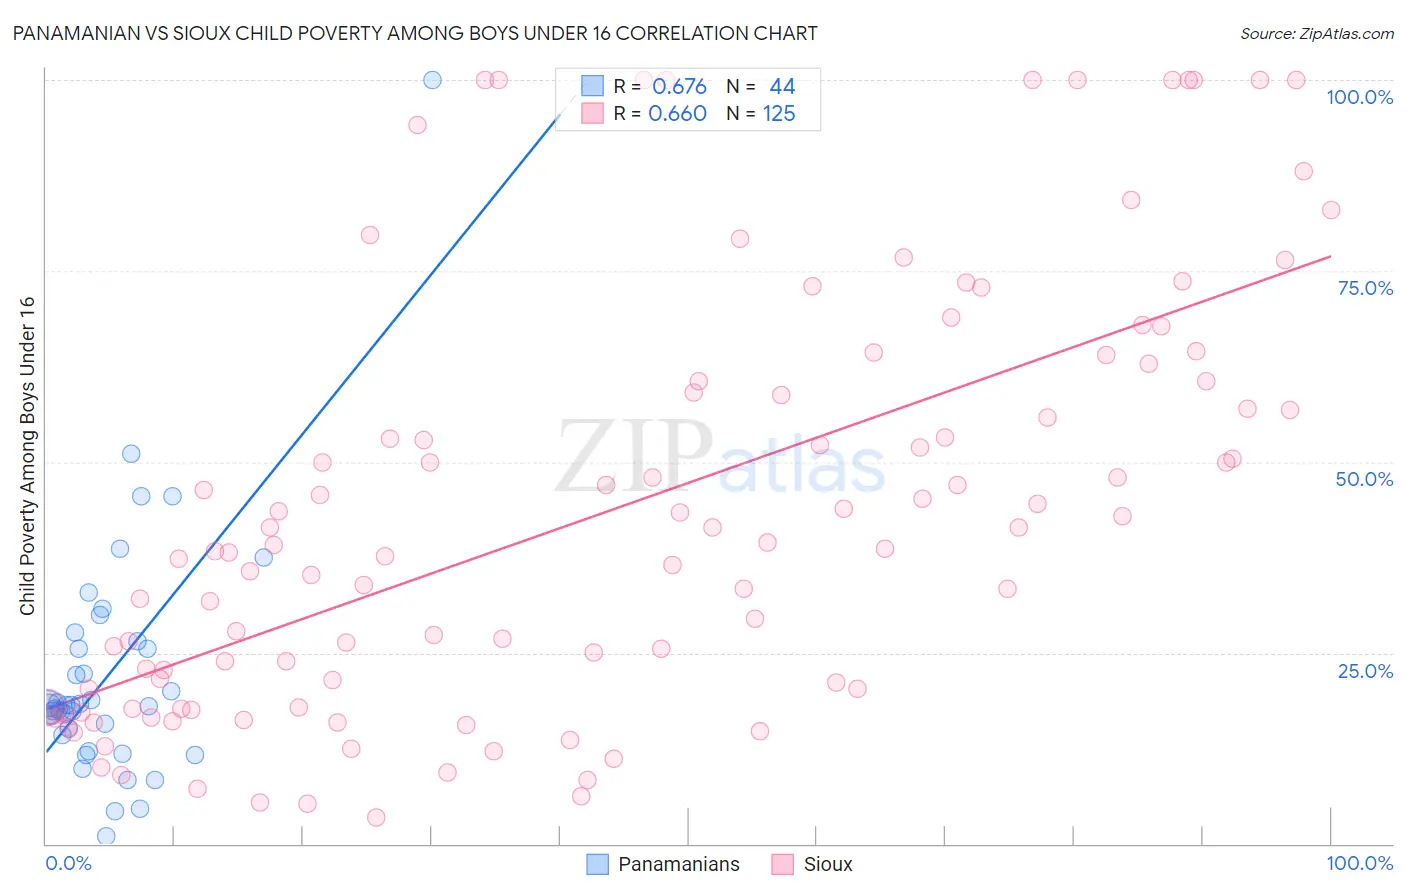 Panamanian vs Sioux Child Poverty Among Boys Under 16